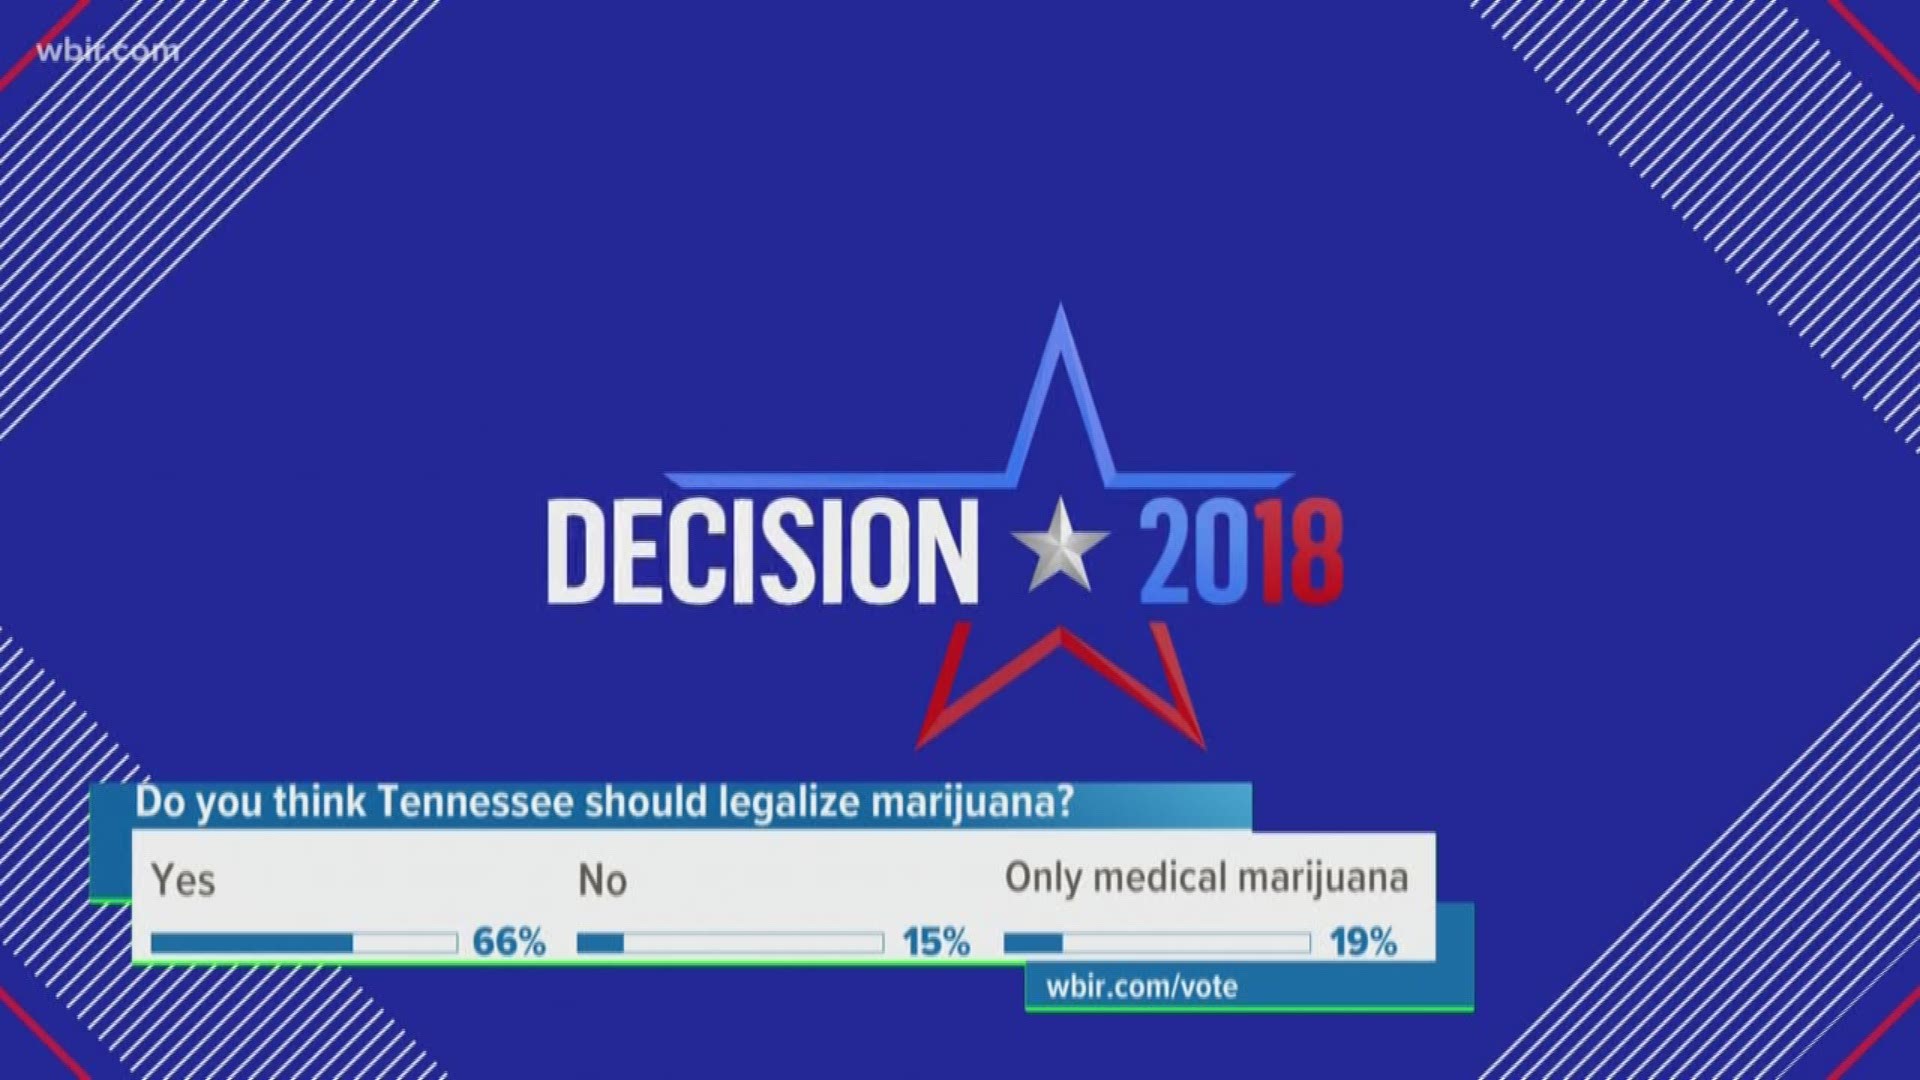 Leading candidates in the 2018 Tennessee gubernatorial race share their views on marijuana legalization.